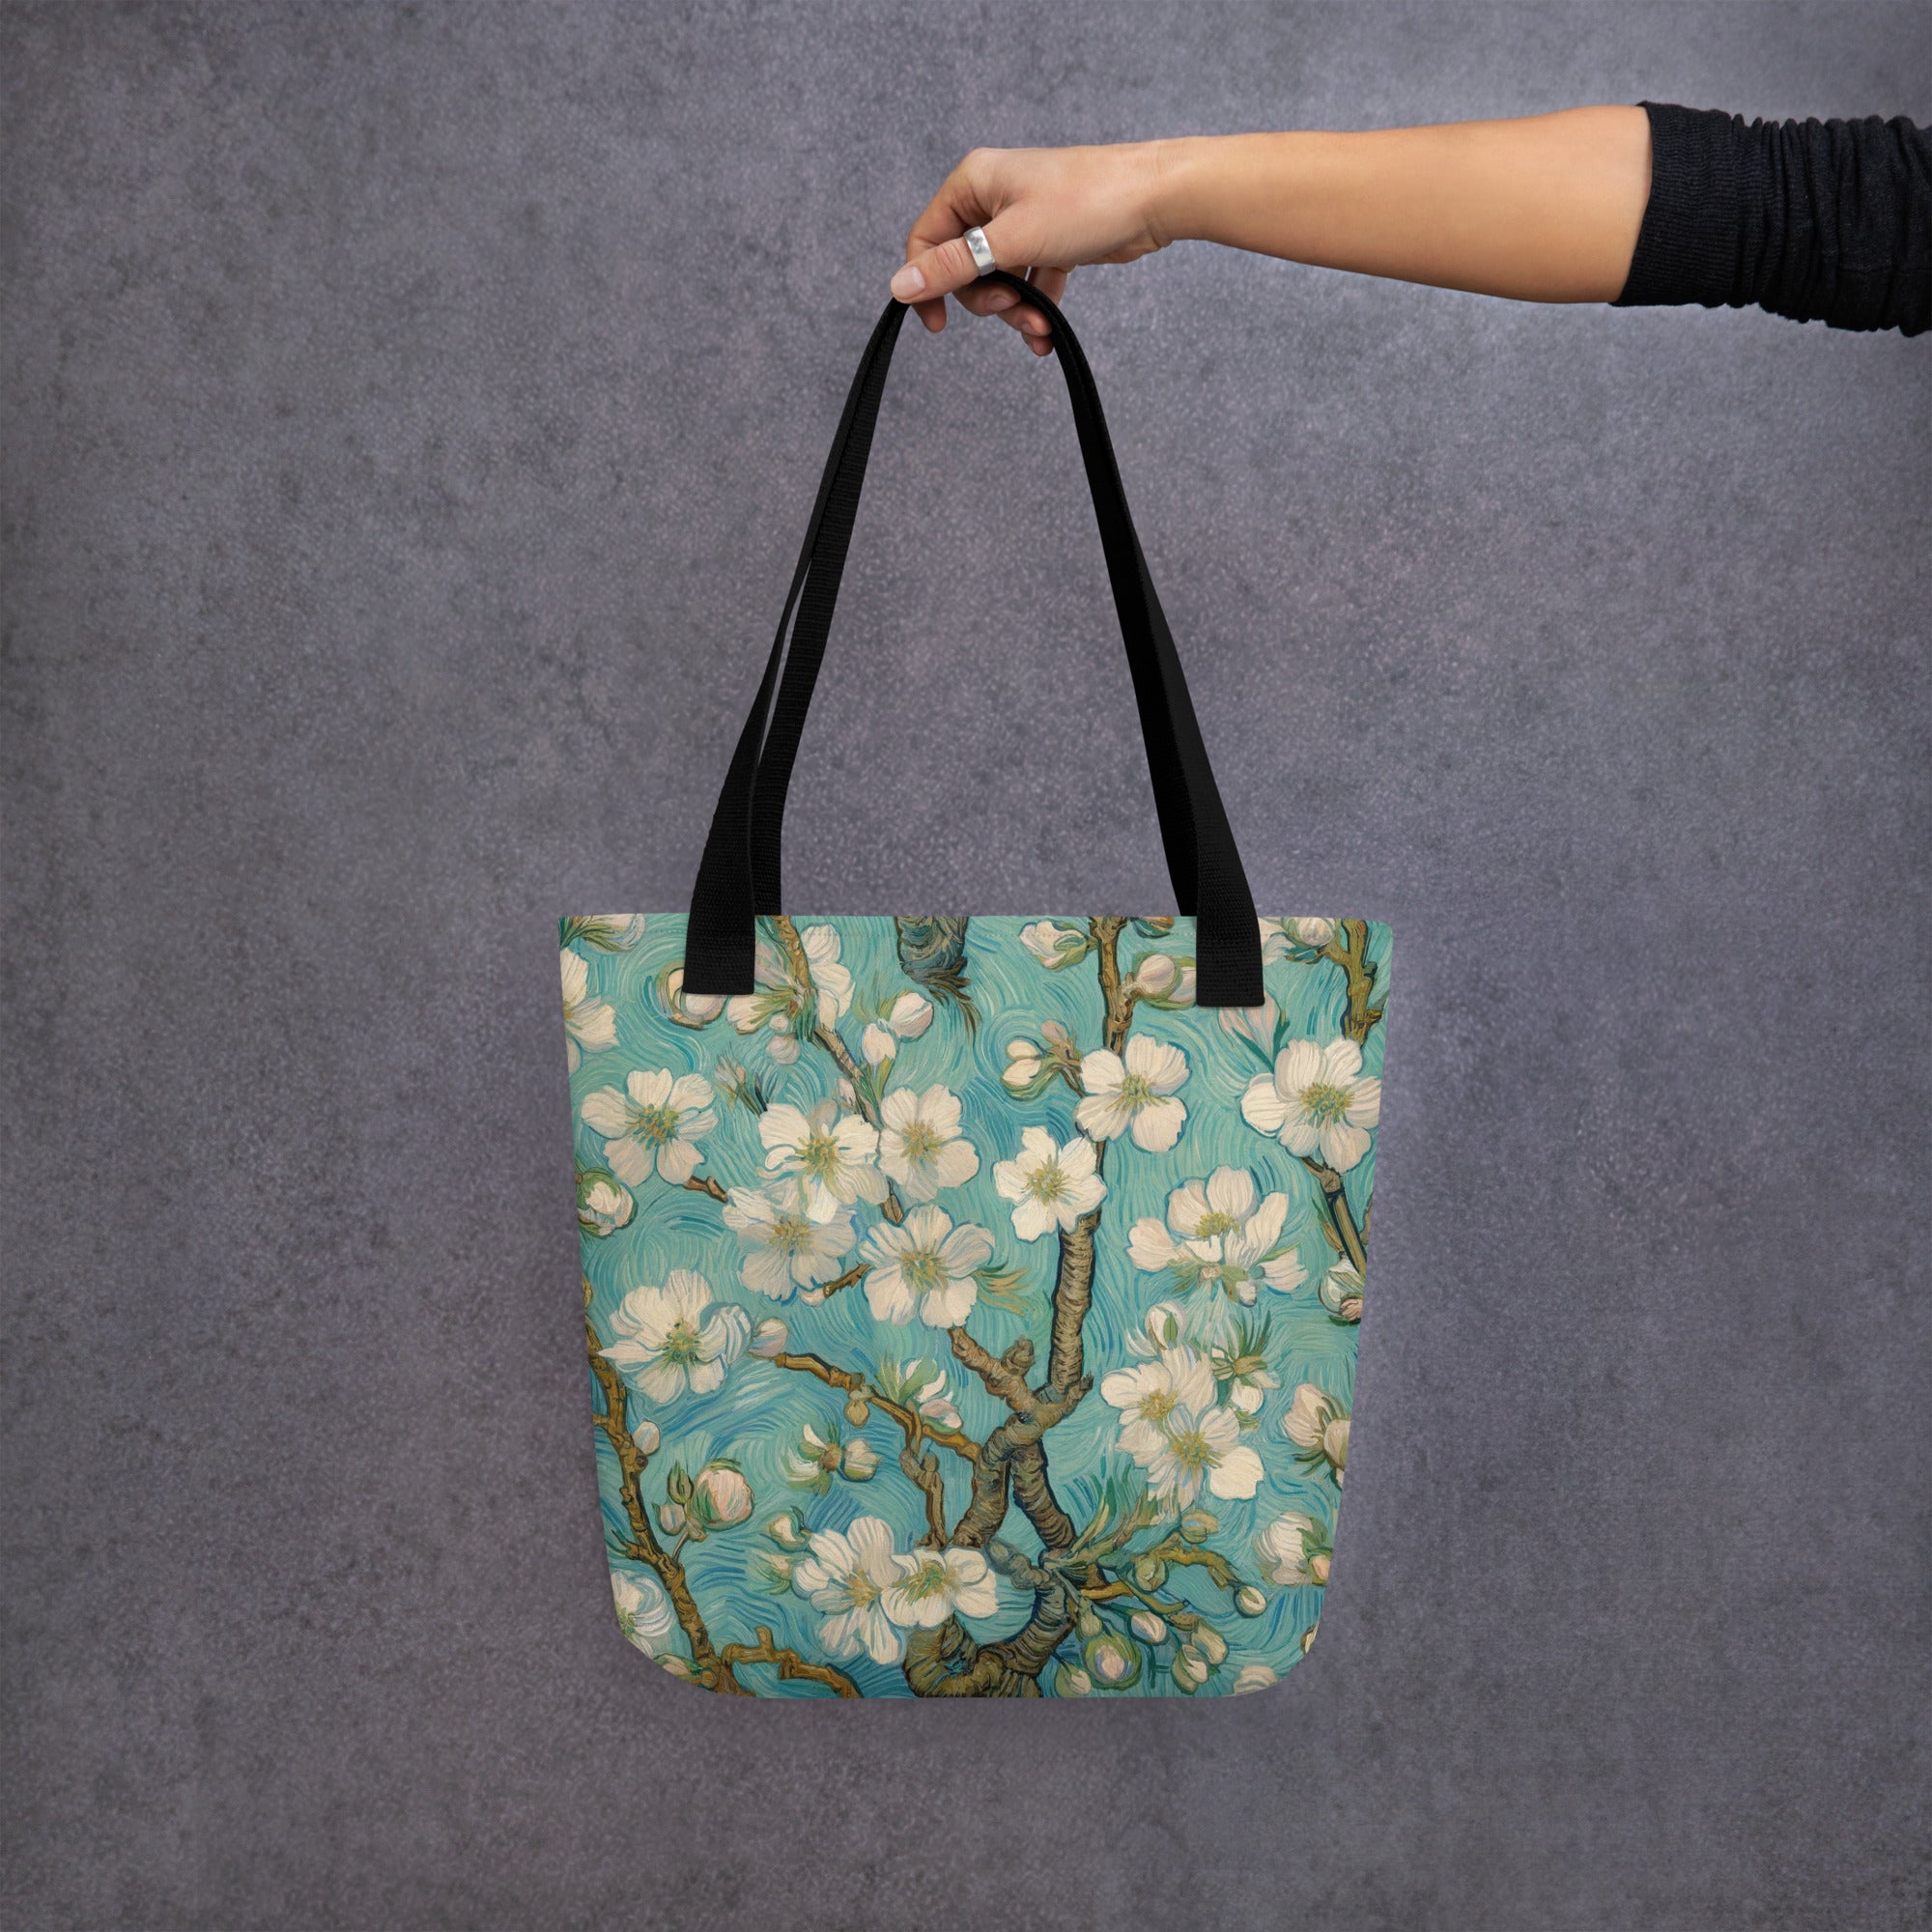 Vincent van Gogh 'Almond Blossom' Famous Painting Totebag | Allover Print Art Tote Bag